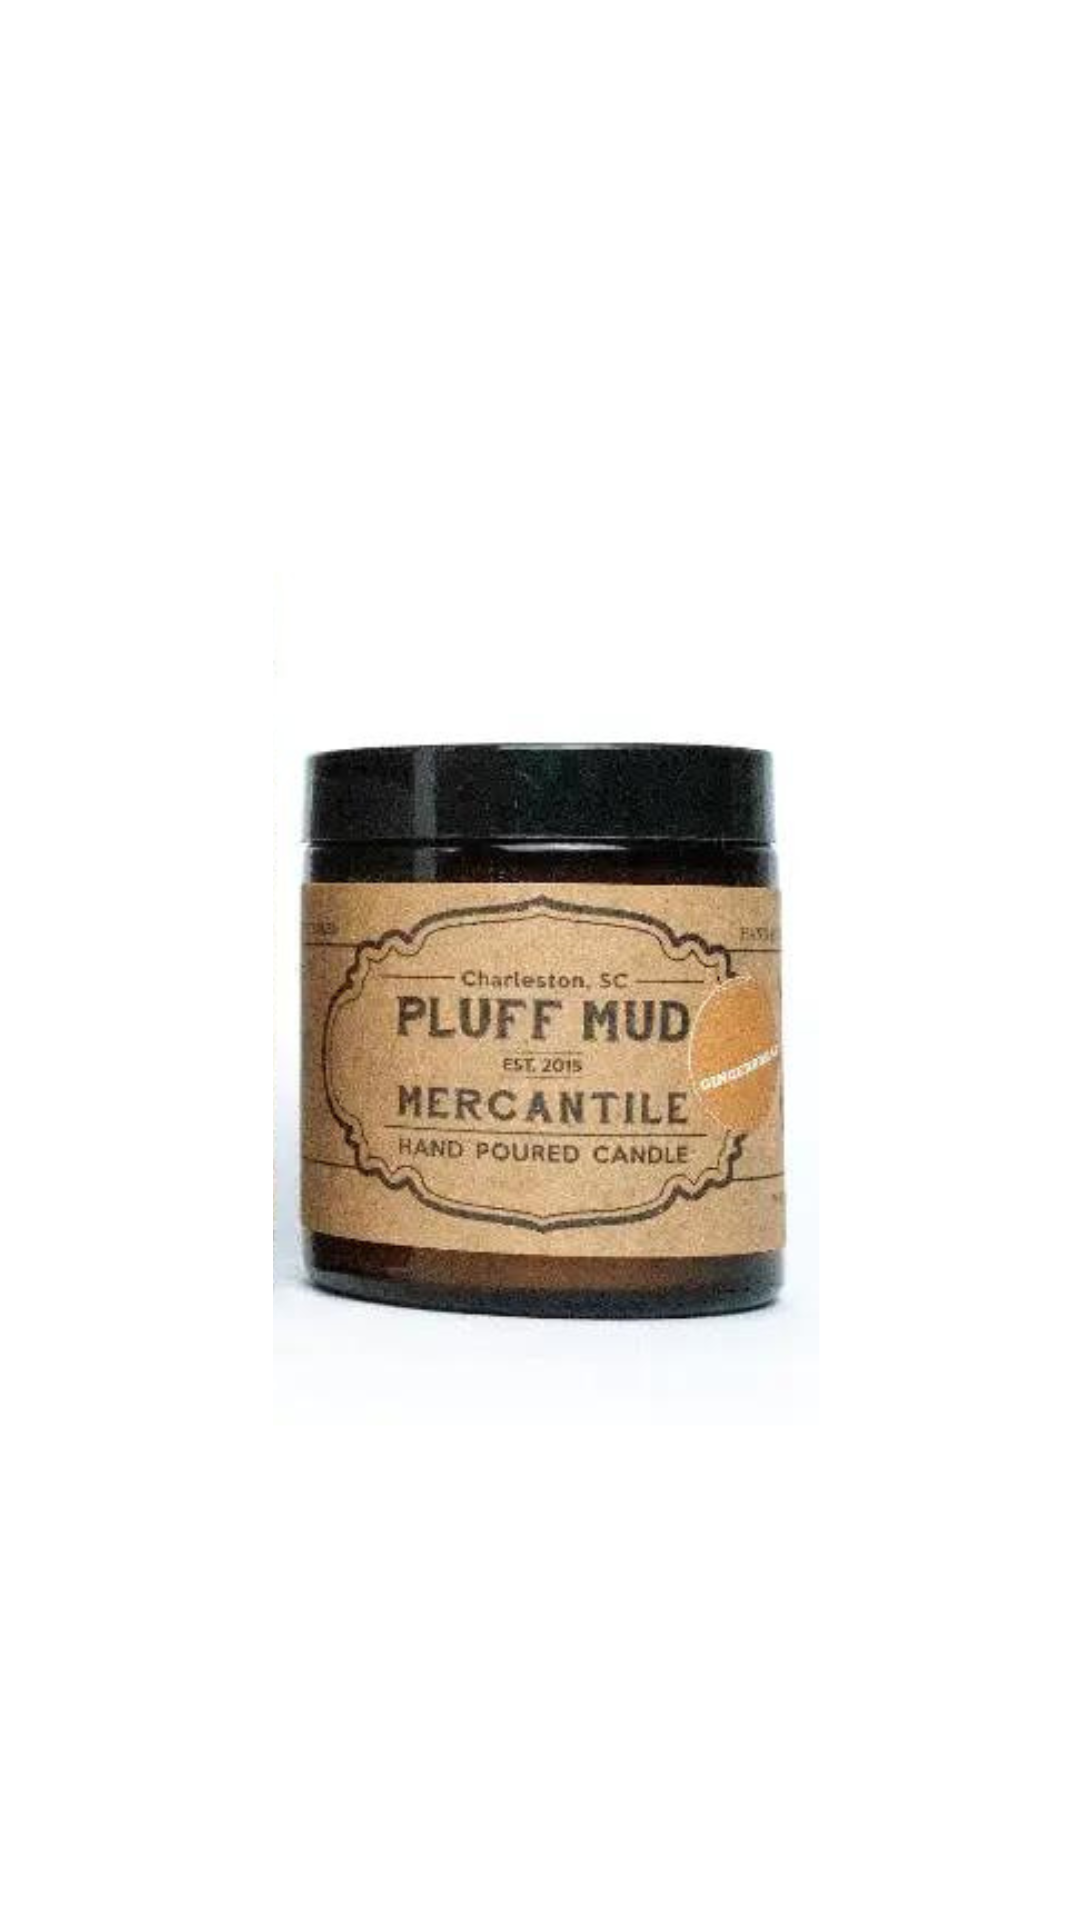 Up The Creek Hand Poured Soy Candle - Pluff Mud Mercantile